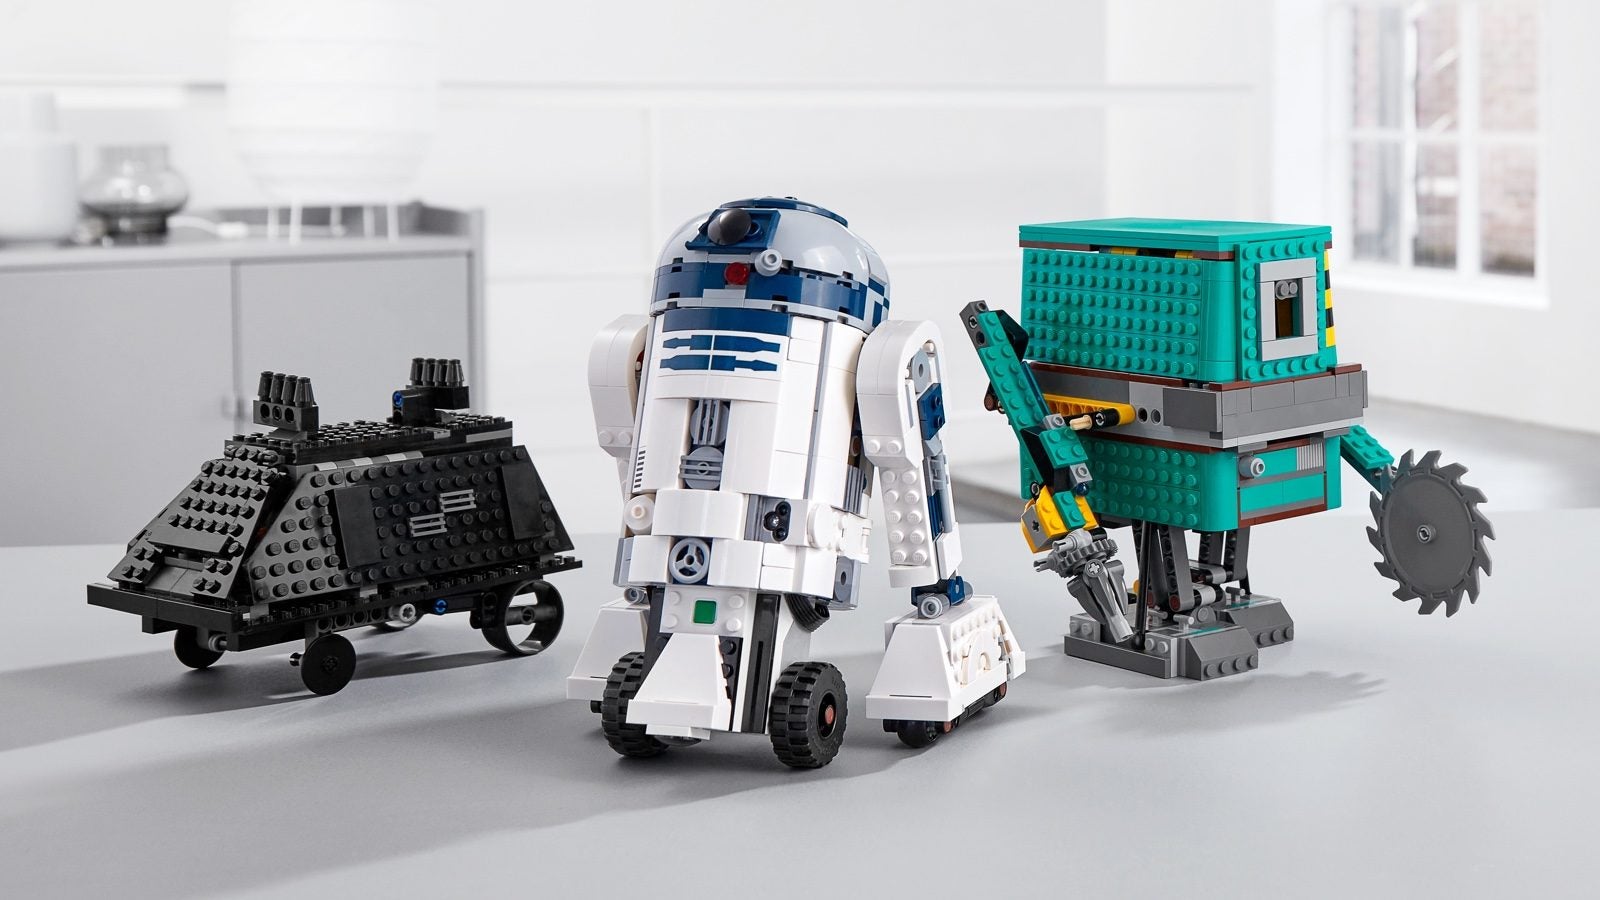 The New LEGO Star Wars BOOST and Things Are Must For 2019 - RedFlagDeals.com